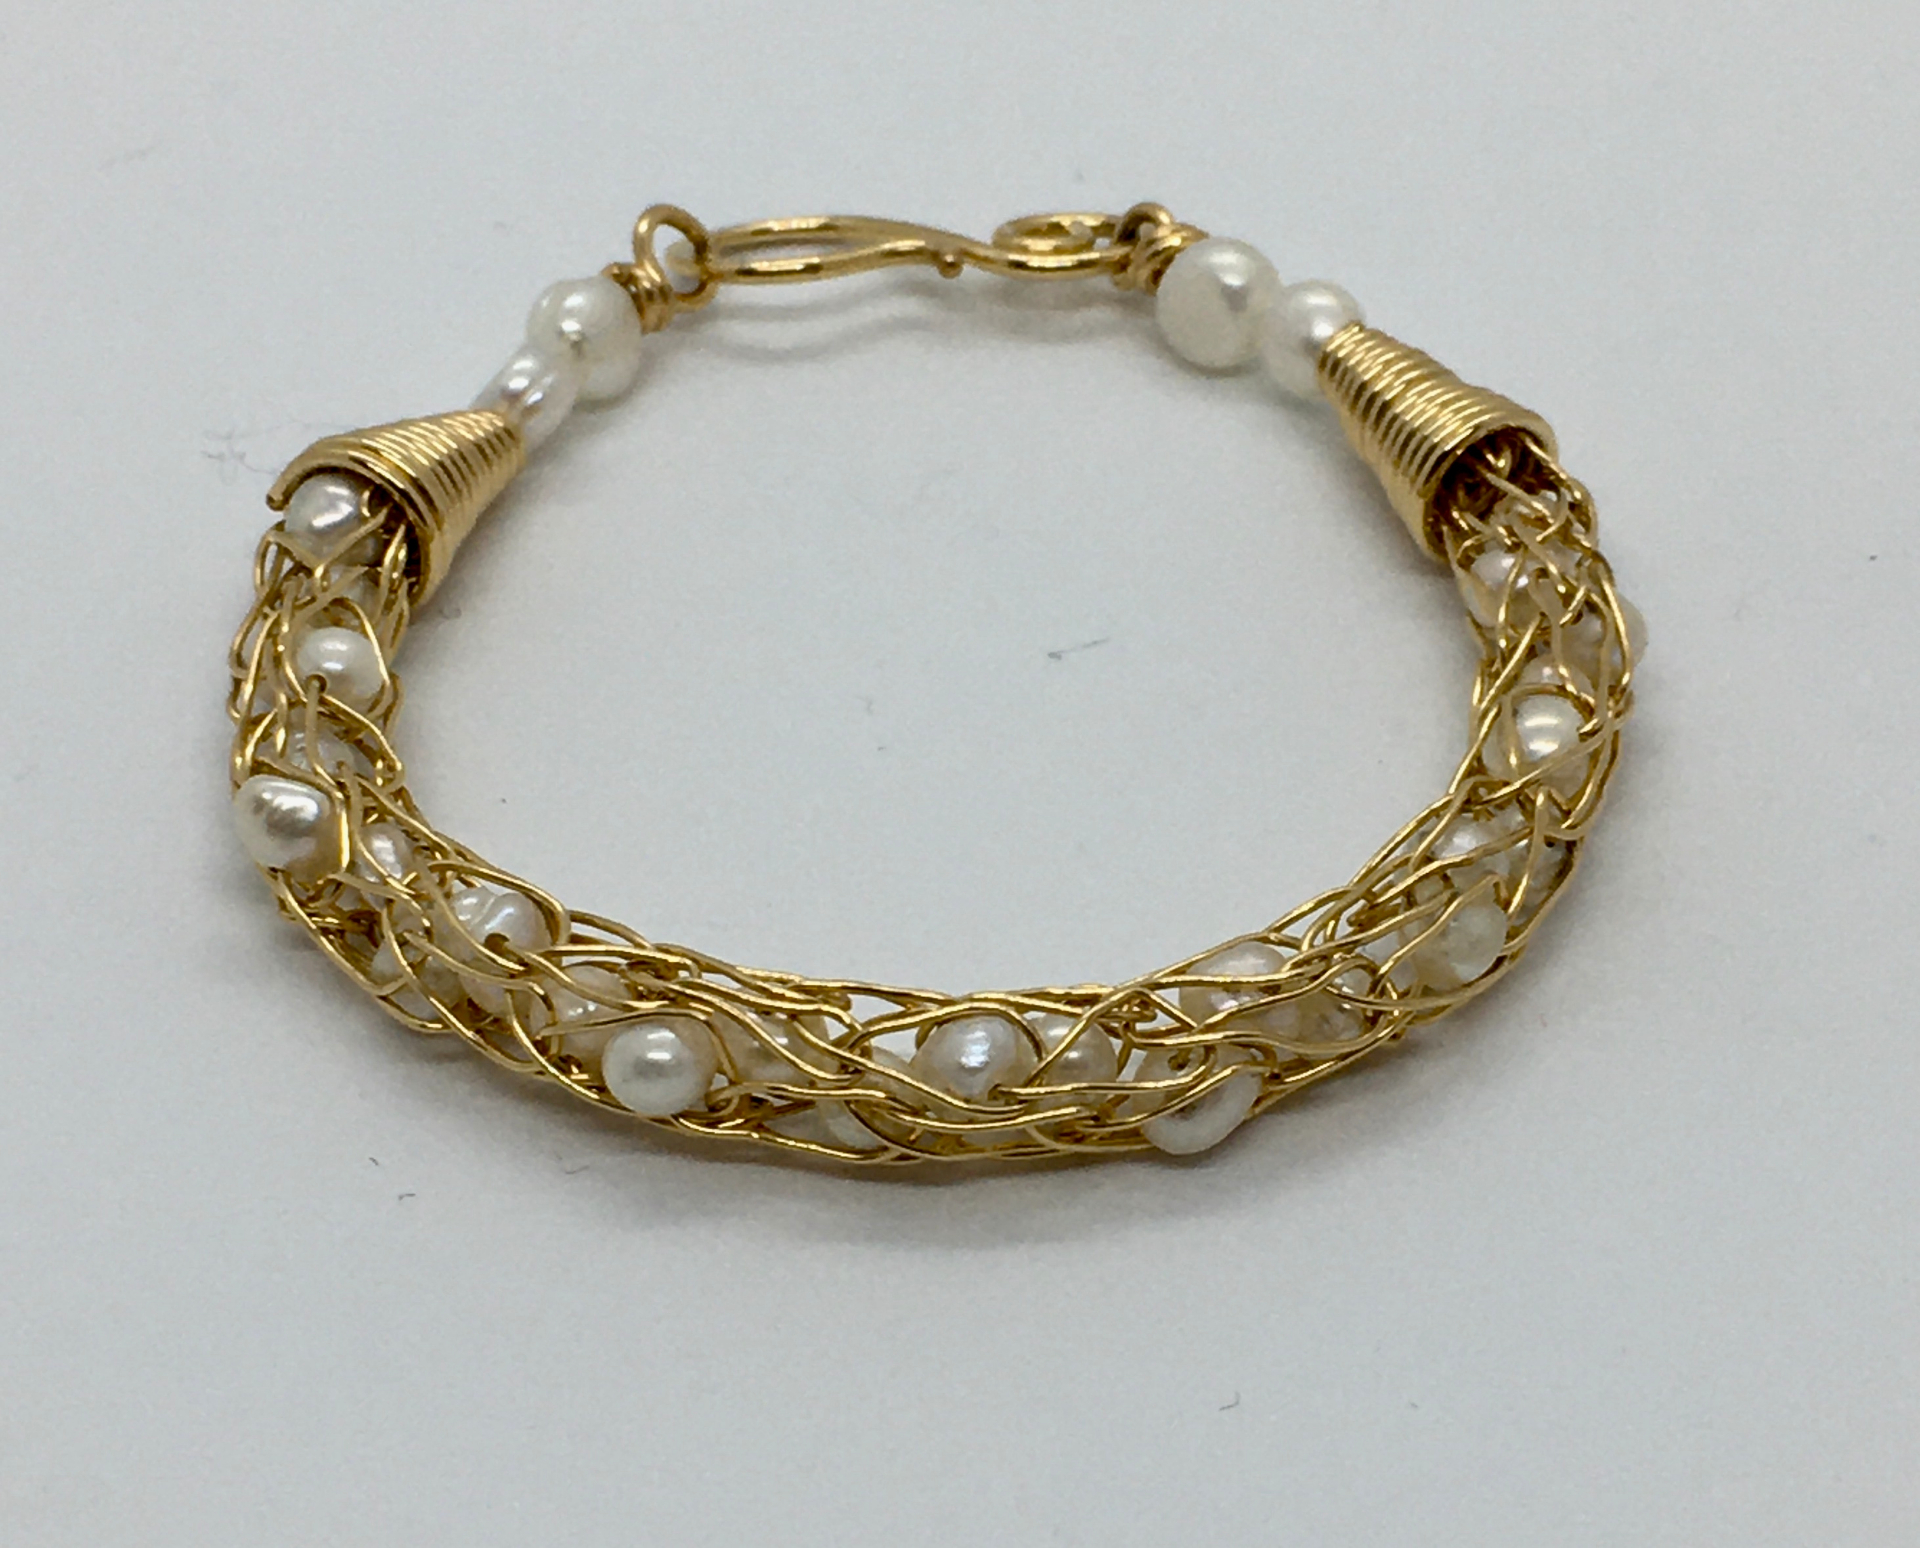 photo of a bracelet made of gold wire and pearls